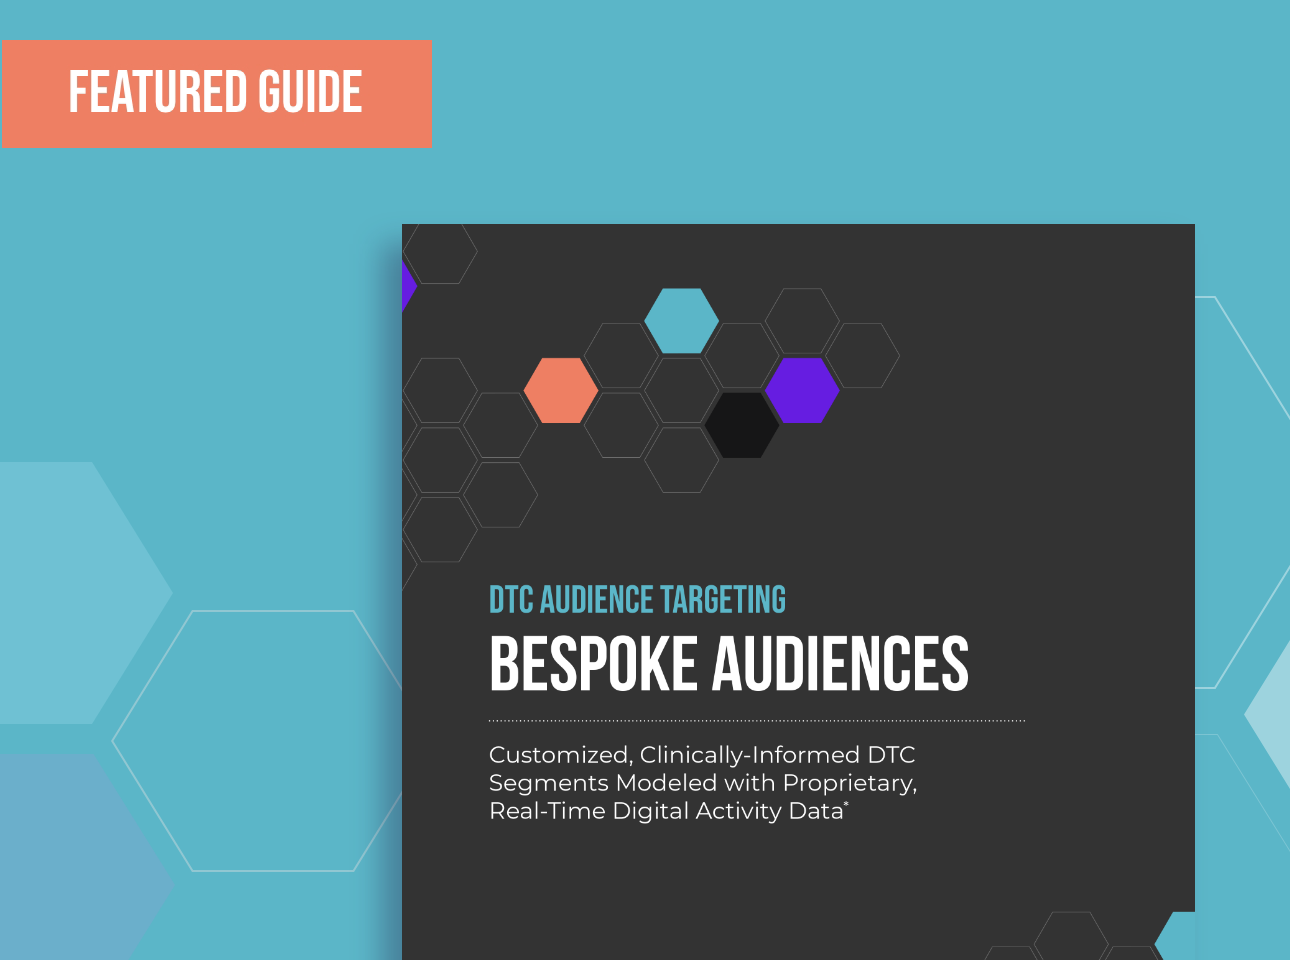 BespokeAudiences_Guide-Feature (1)-1